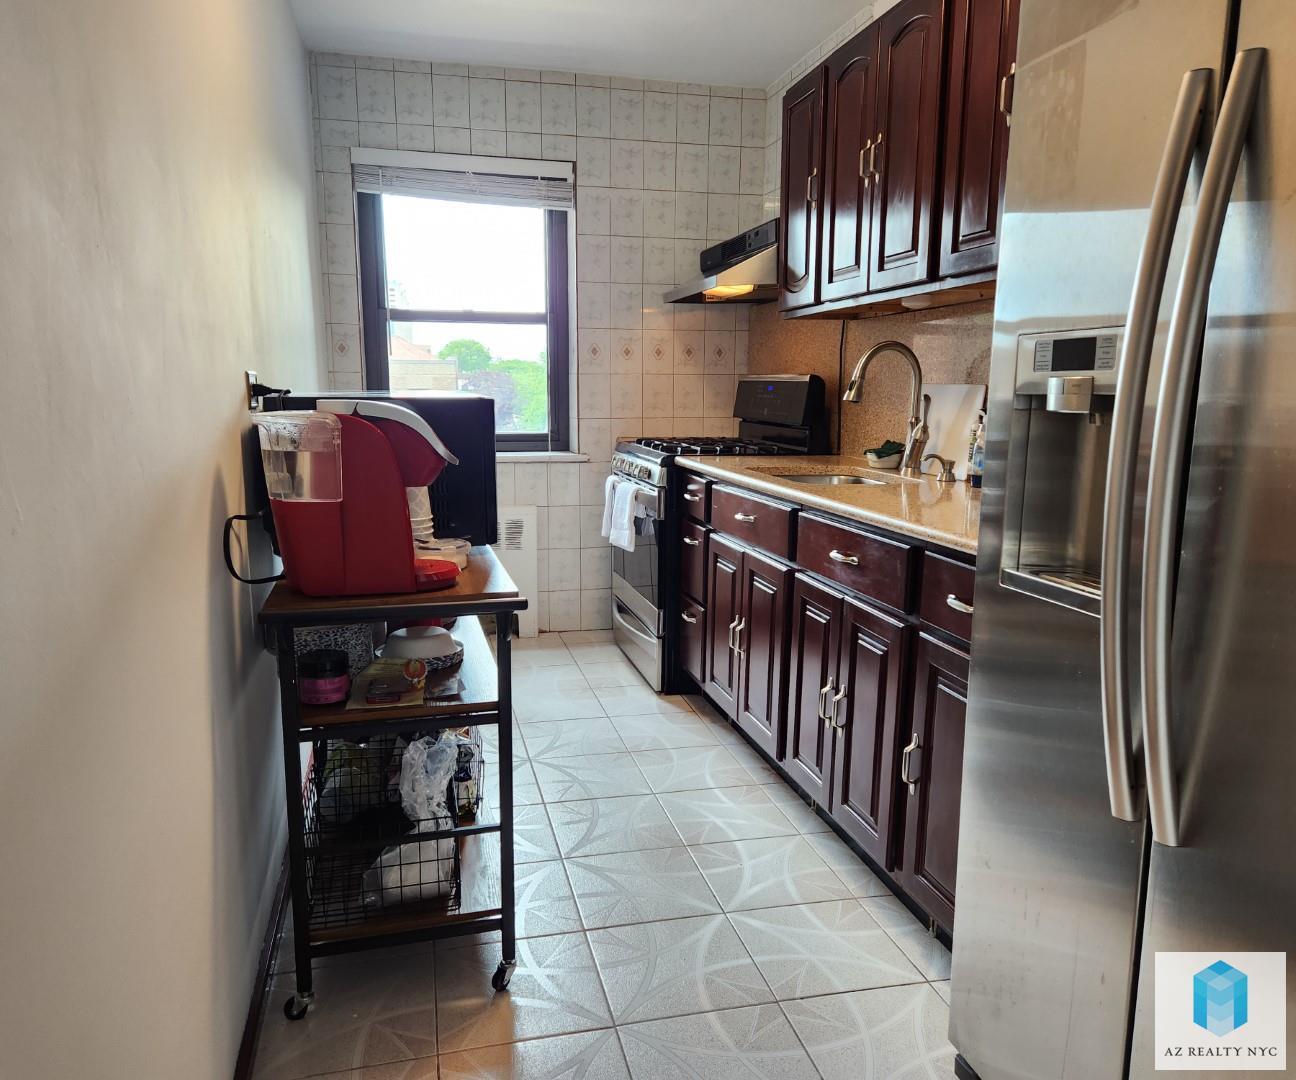 34-11 93rd Street 3-B Jackson Heights Queens NY 11372